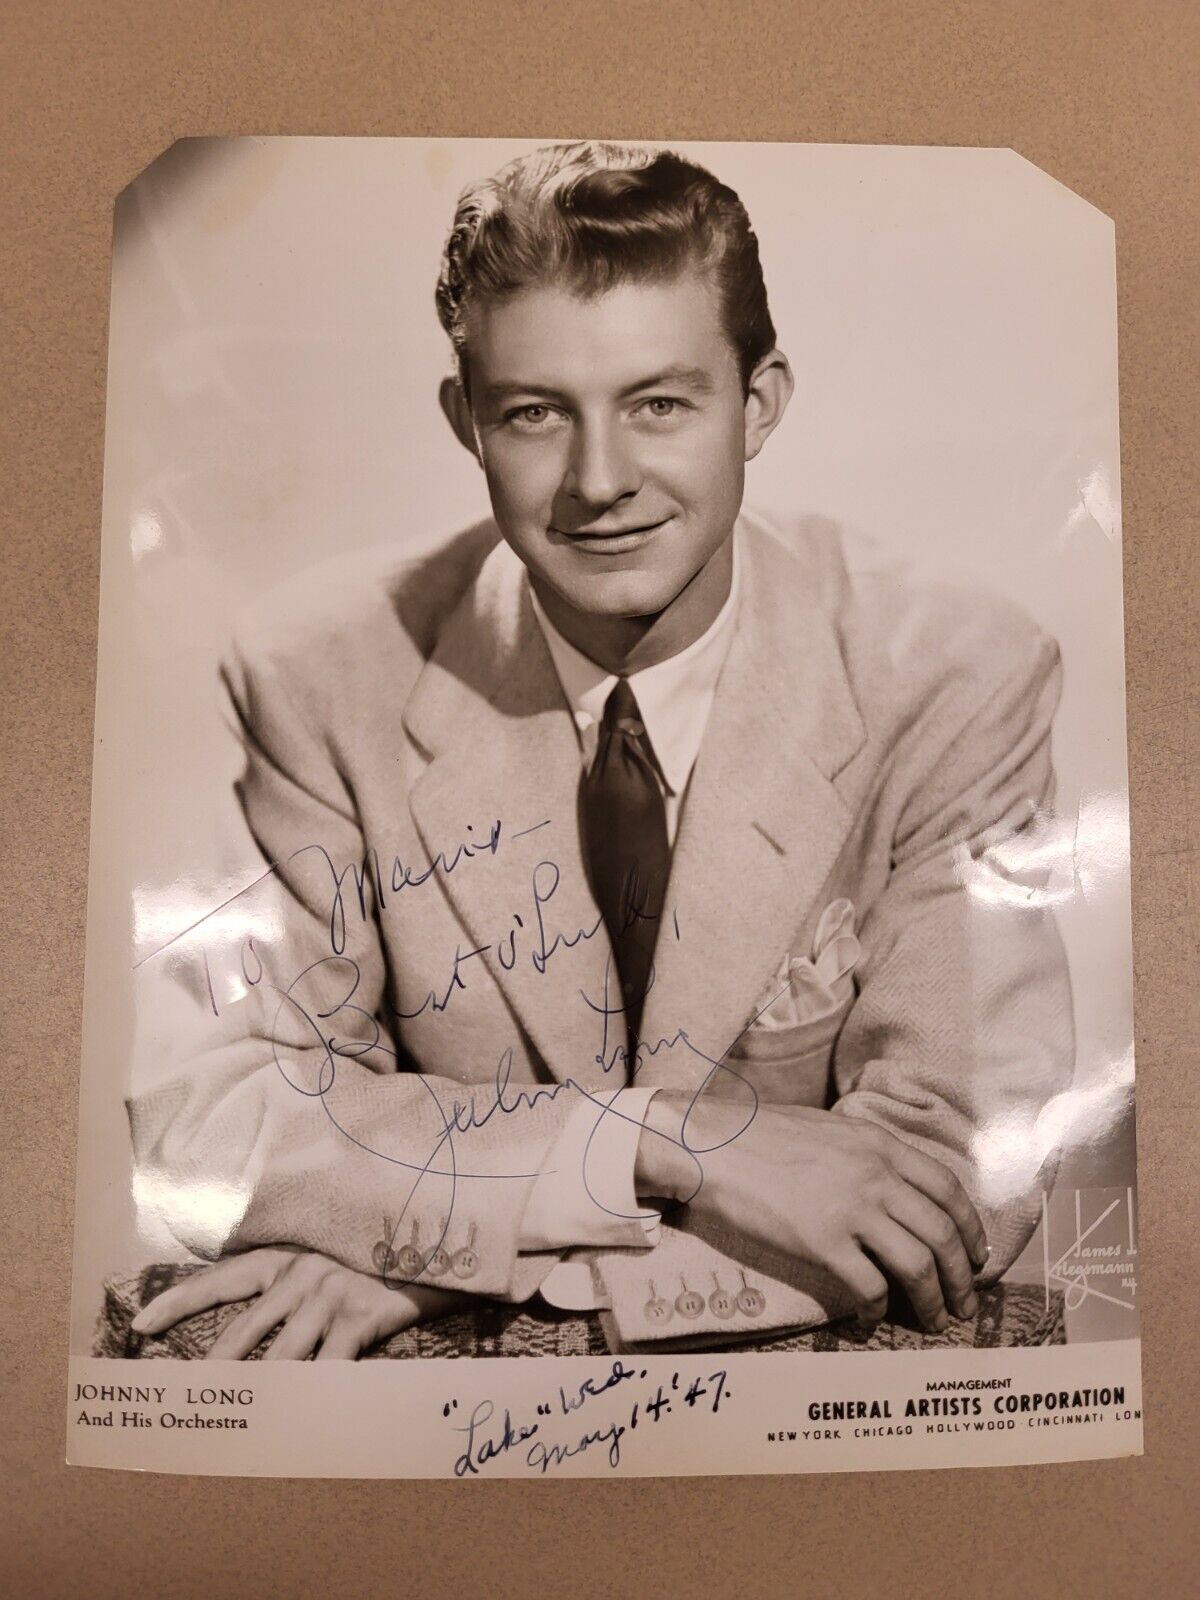 To Mario Best O\' Luck Johnny Long Signed Photograph 1947 By James J. Kriegsmann